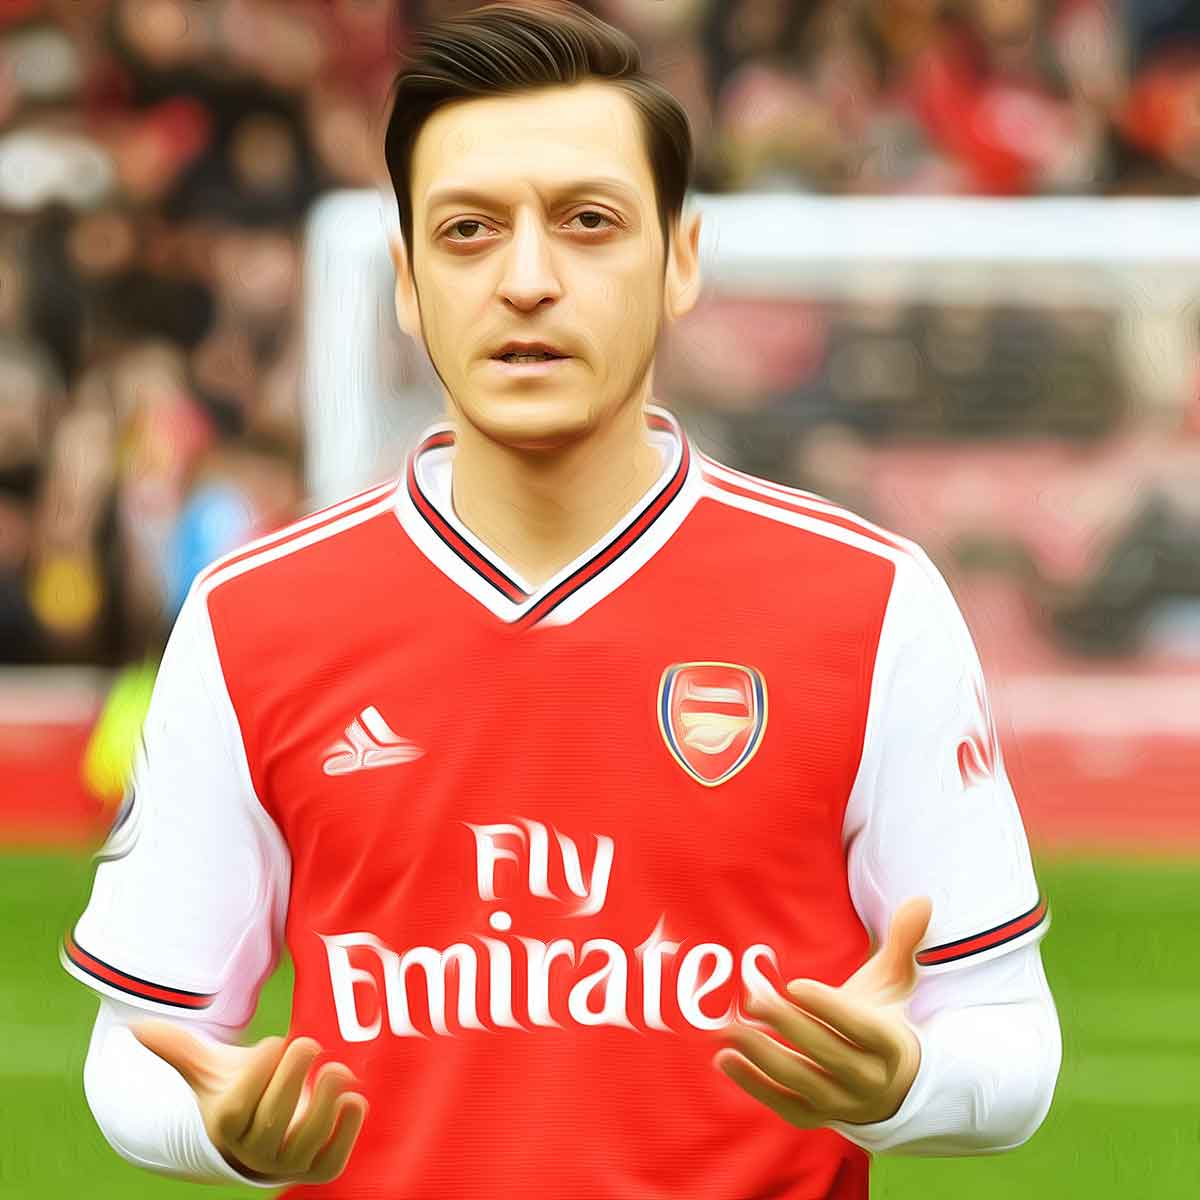 German soccer player Mesut Ozil tweeted, “Praying during the holy night of Lailat al-Qadr for the safety and well-being of our Muslim brothers and sisters in India"